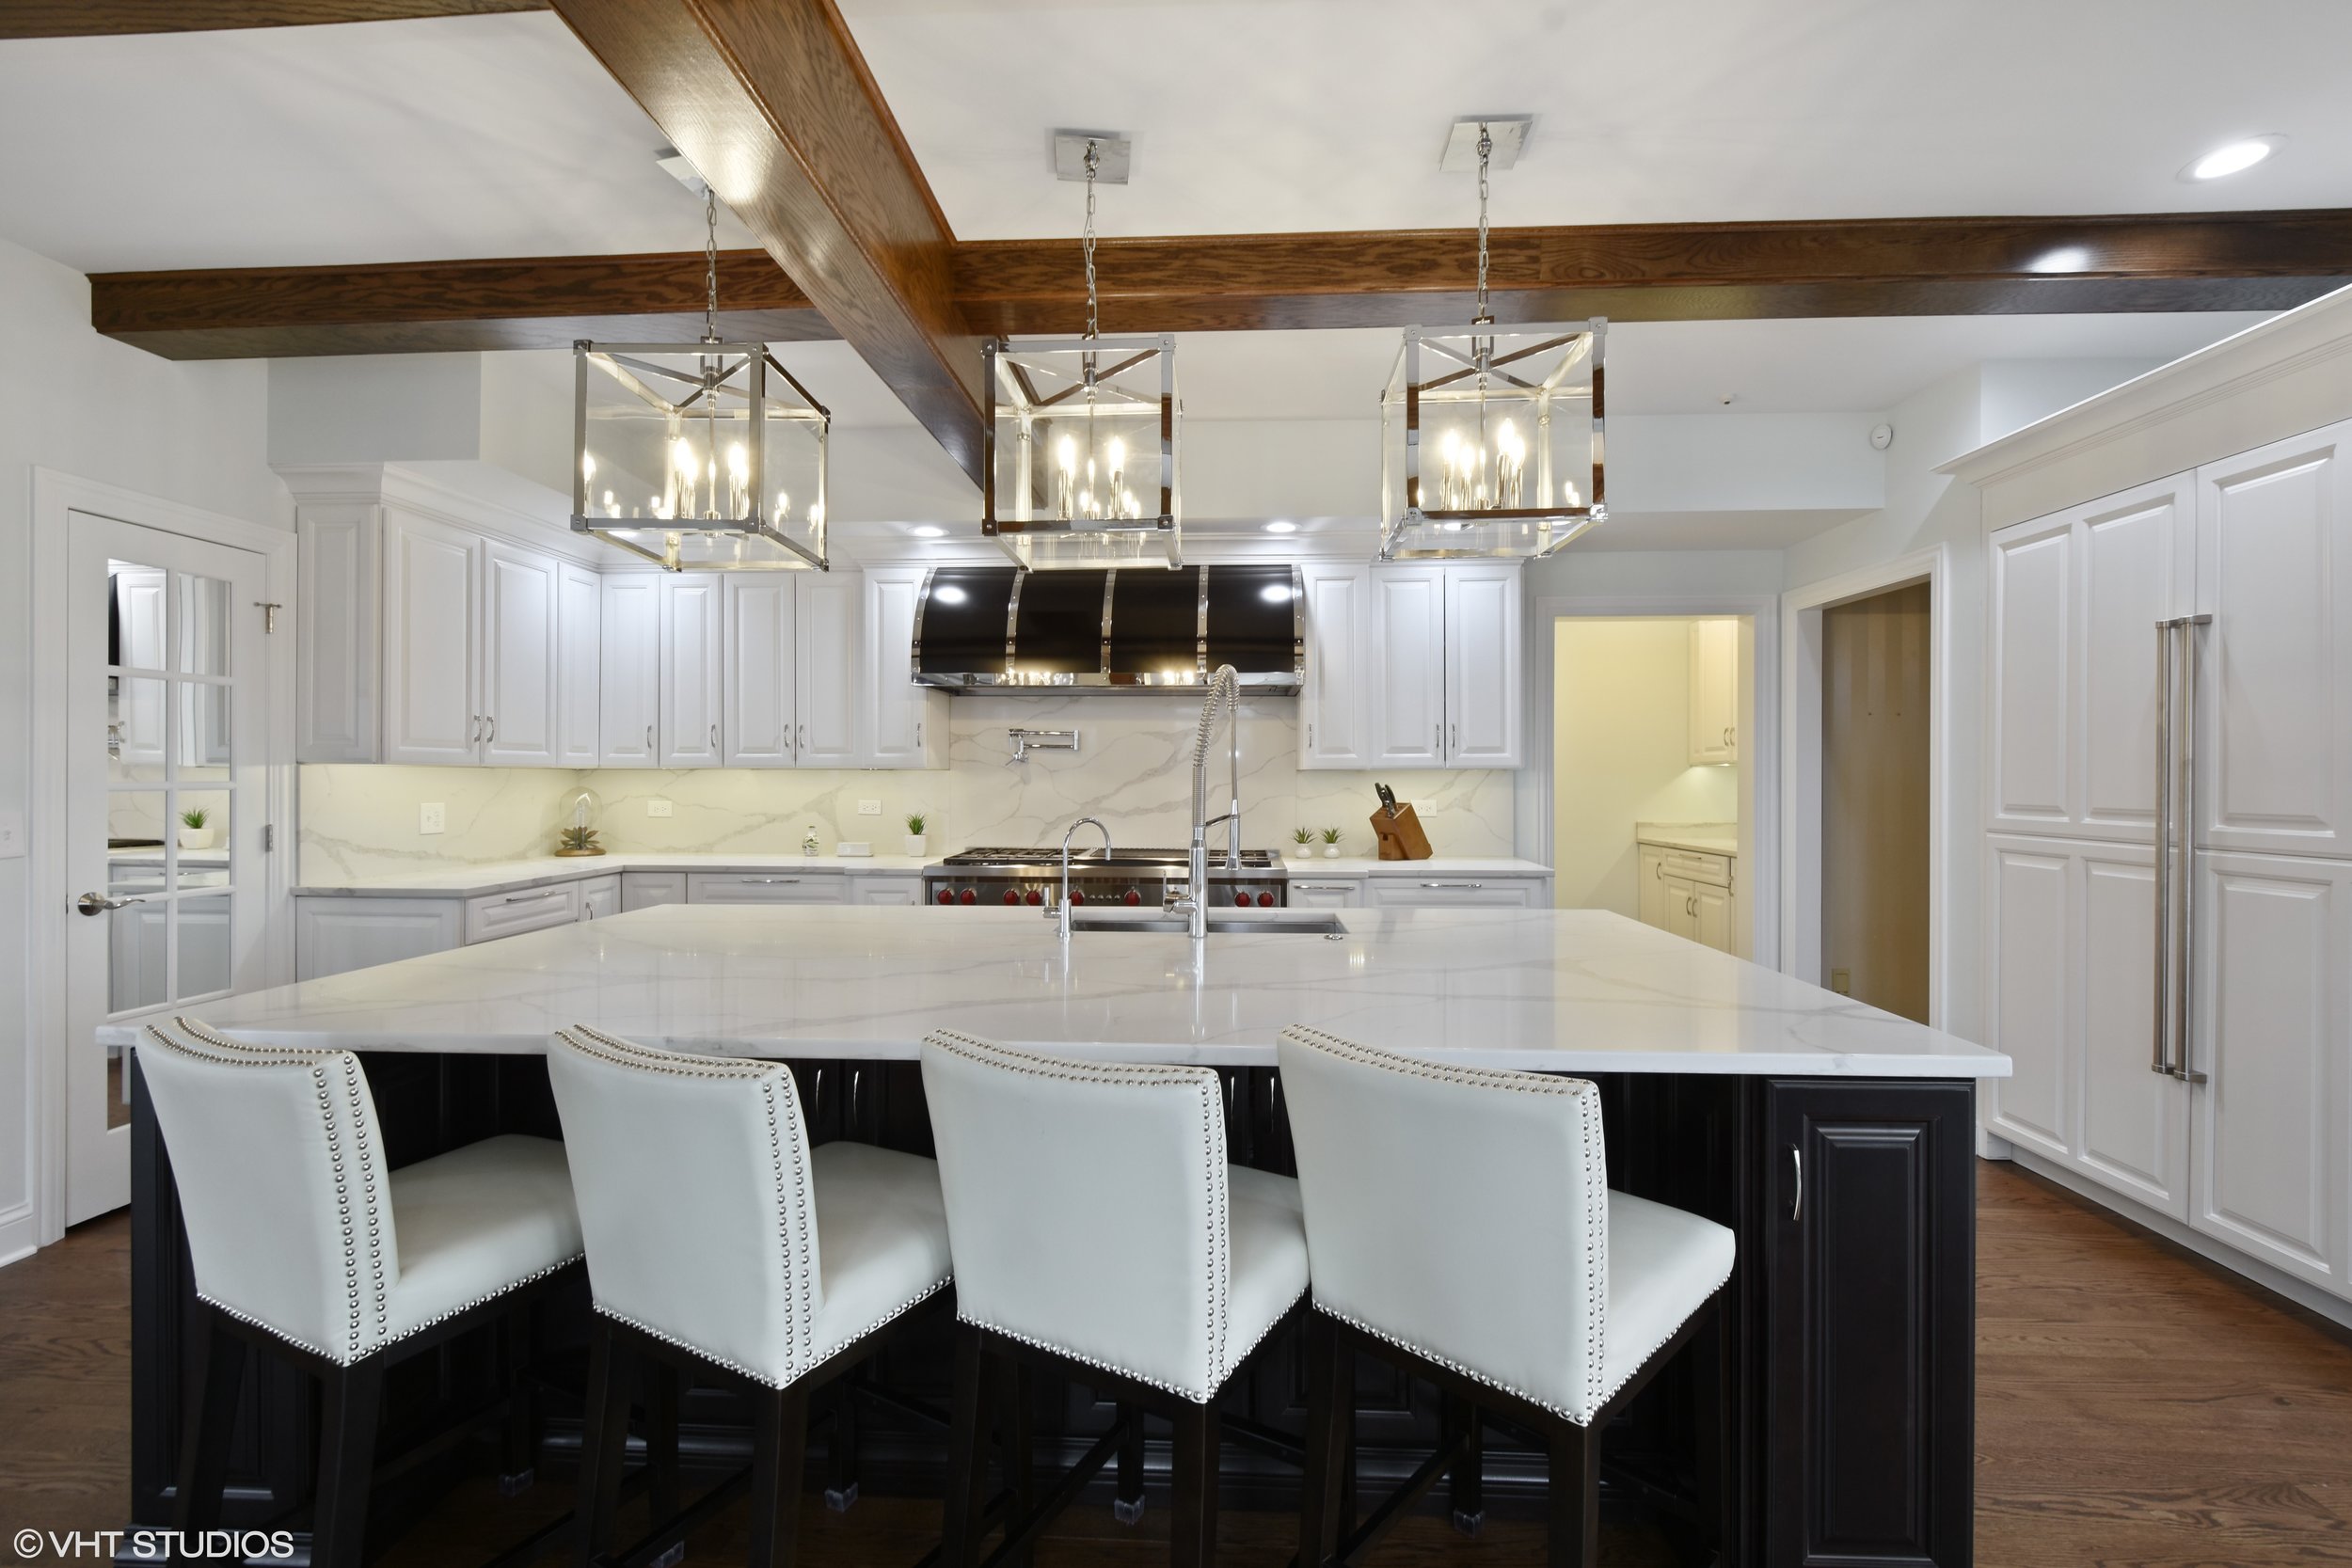 Oversized Island in this South Barrington Kitchen Update